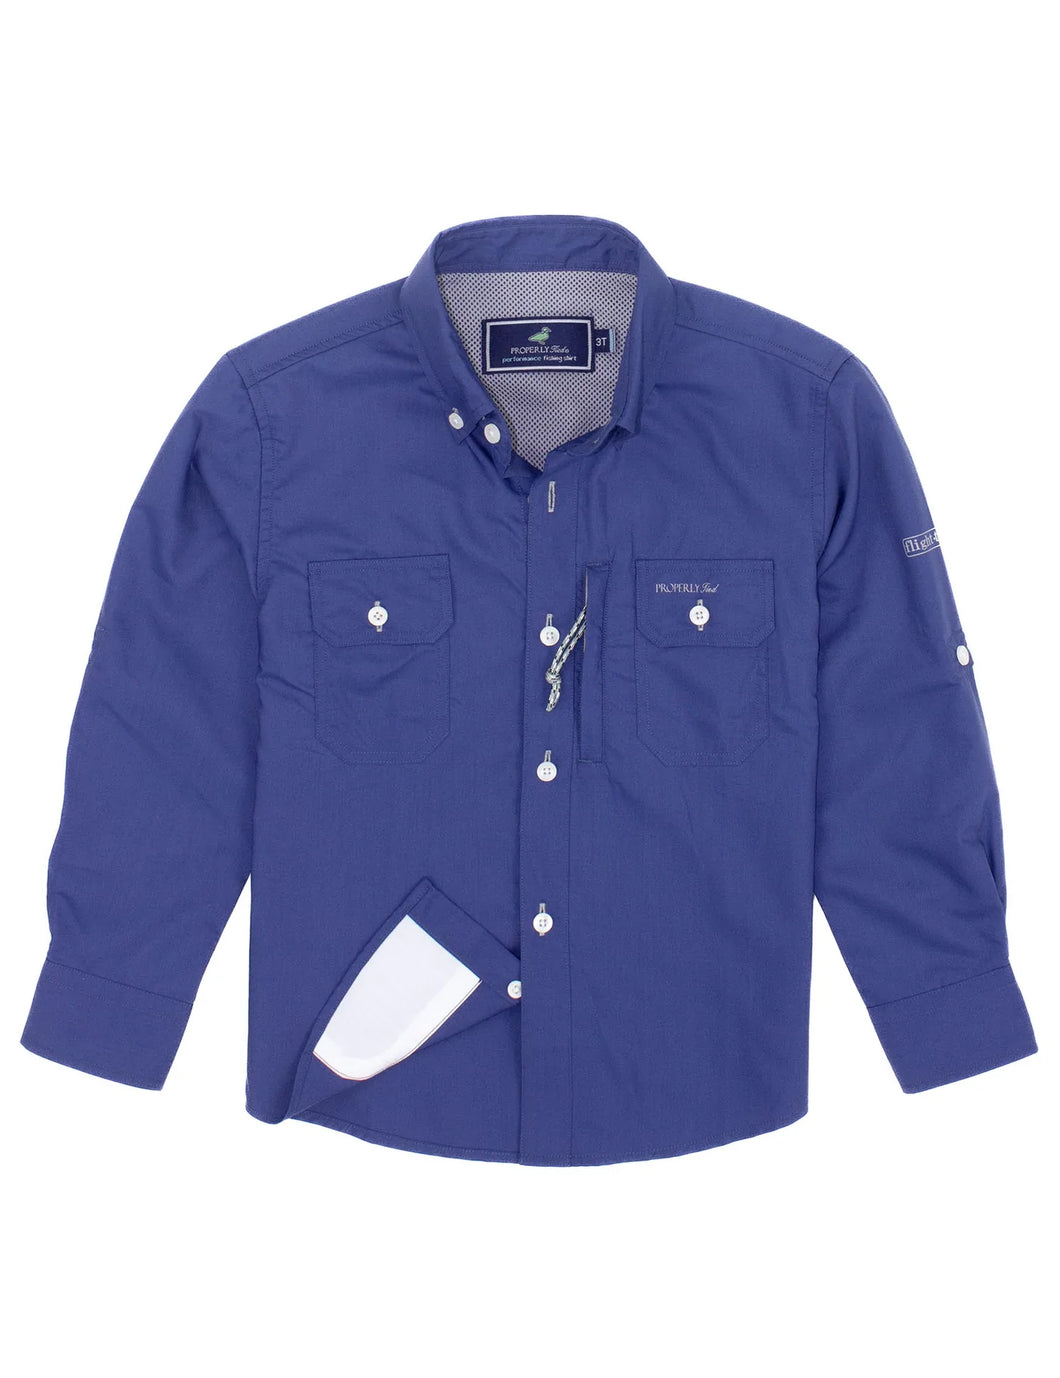 PROPERLY Tied - Offshore Fishing Shirt - River Blue